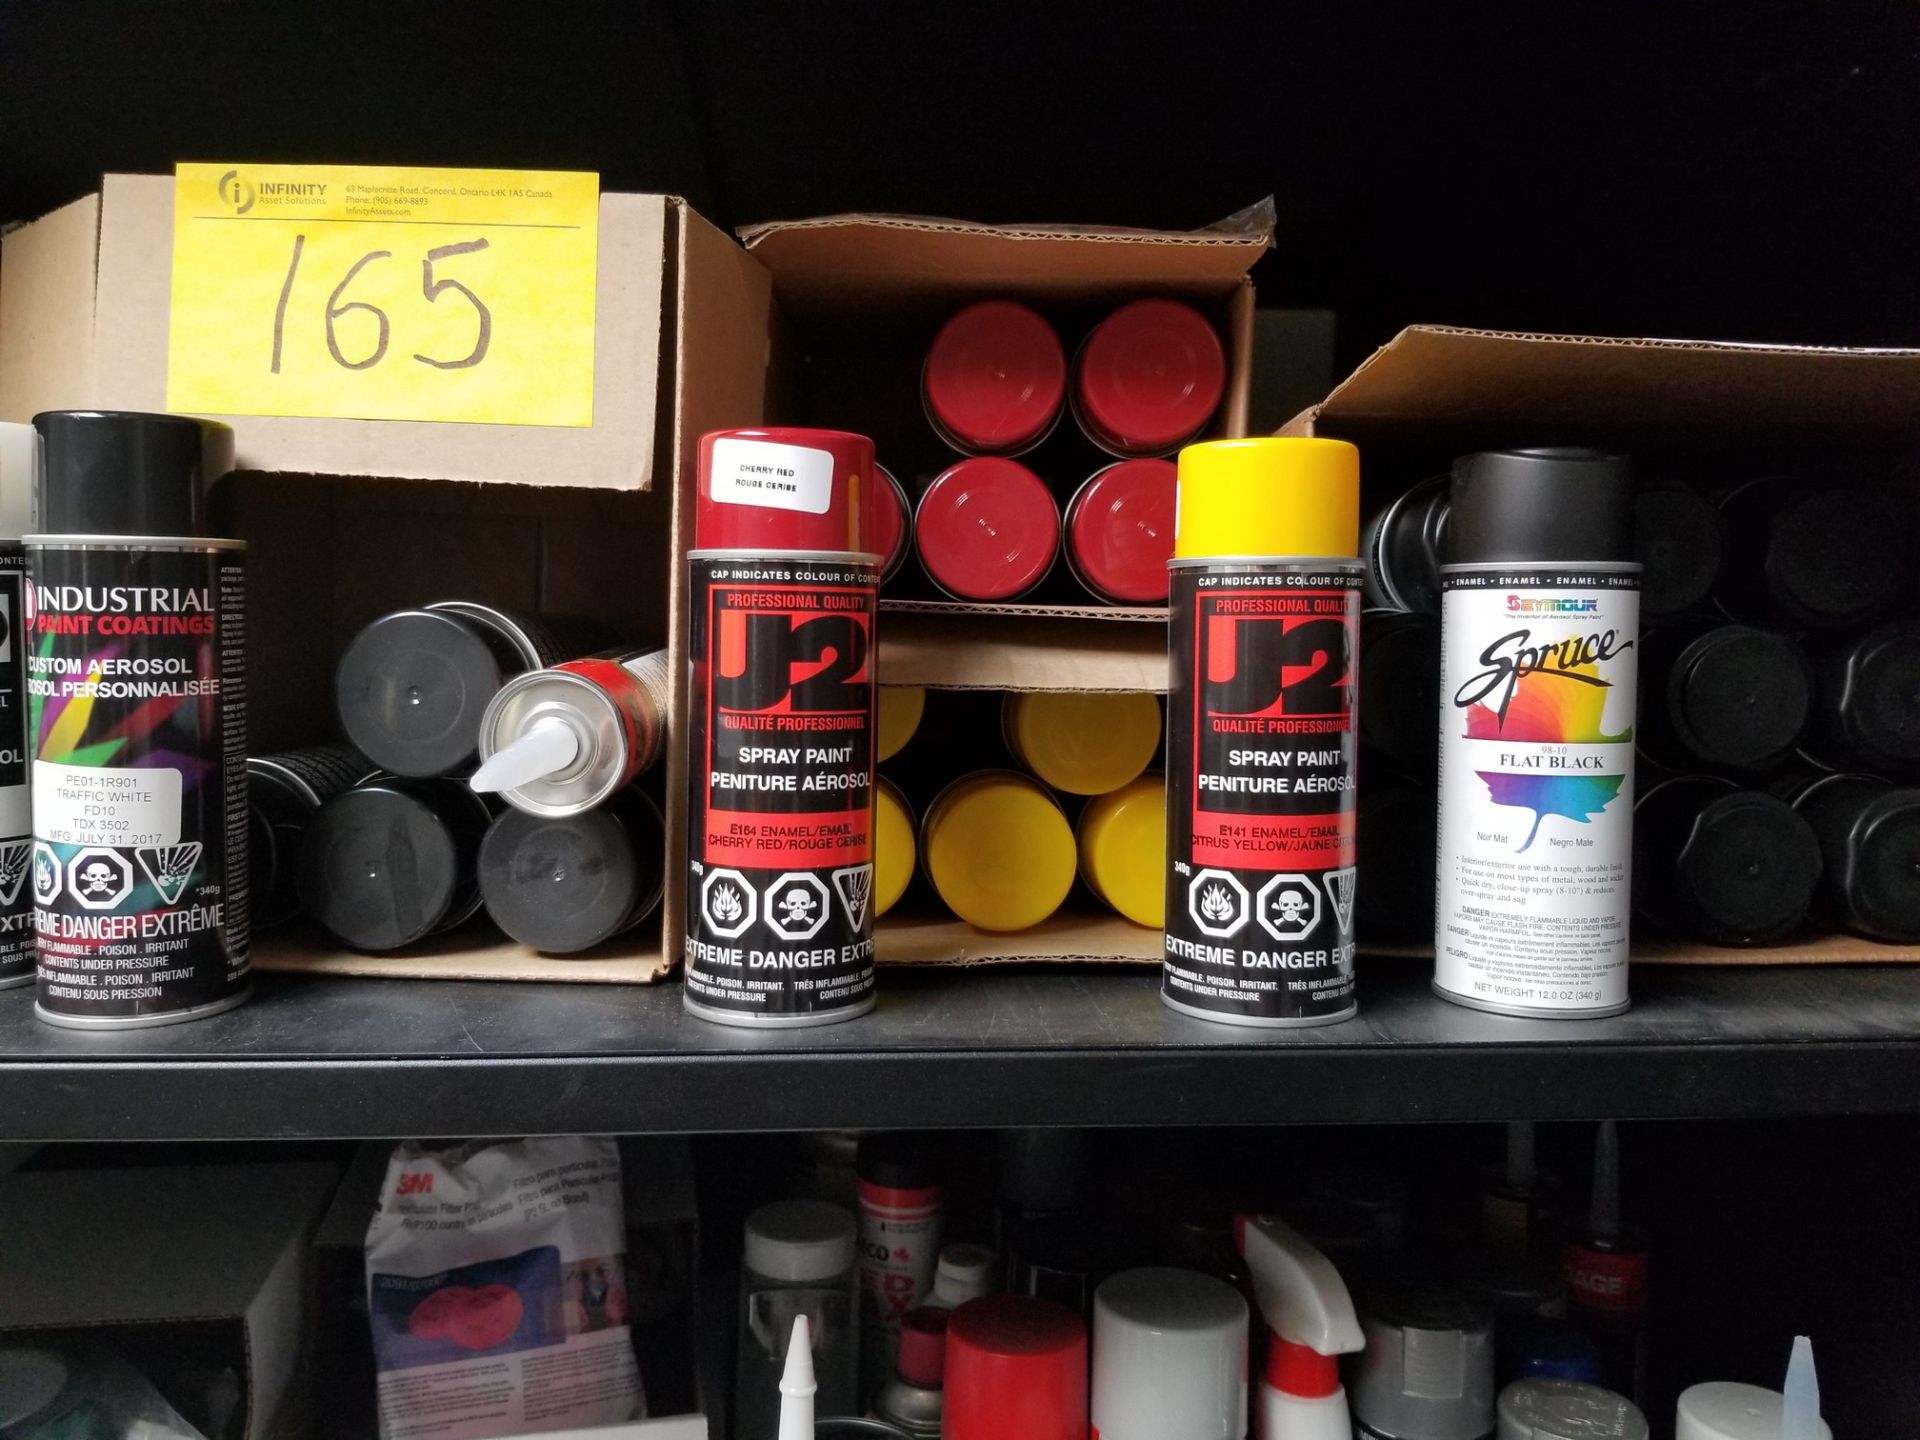 LOT OF ASSORTED PAINTS, ADHESIVES, BRUSHES, SPRAYS ETC. - Image 3 of 5